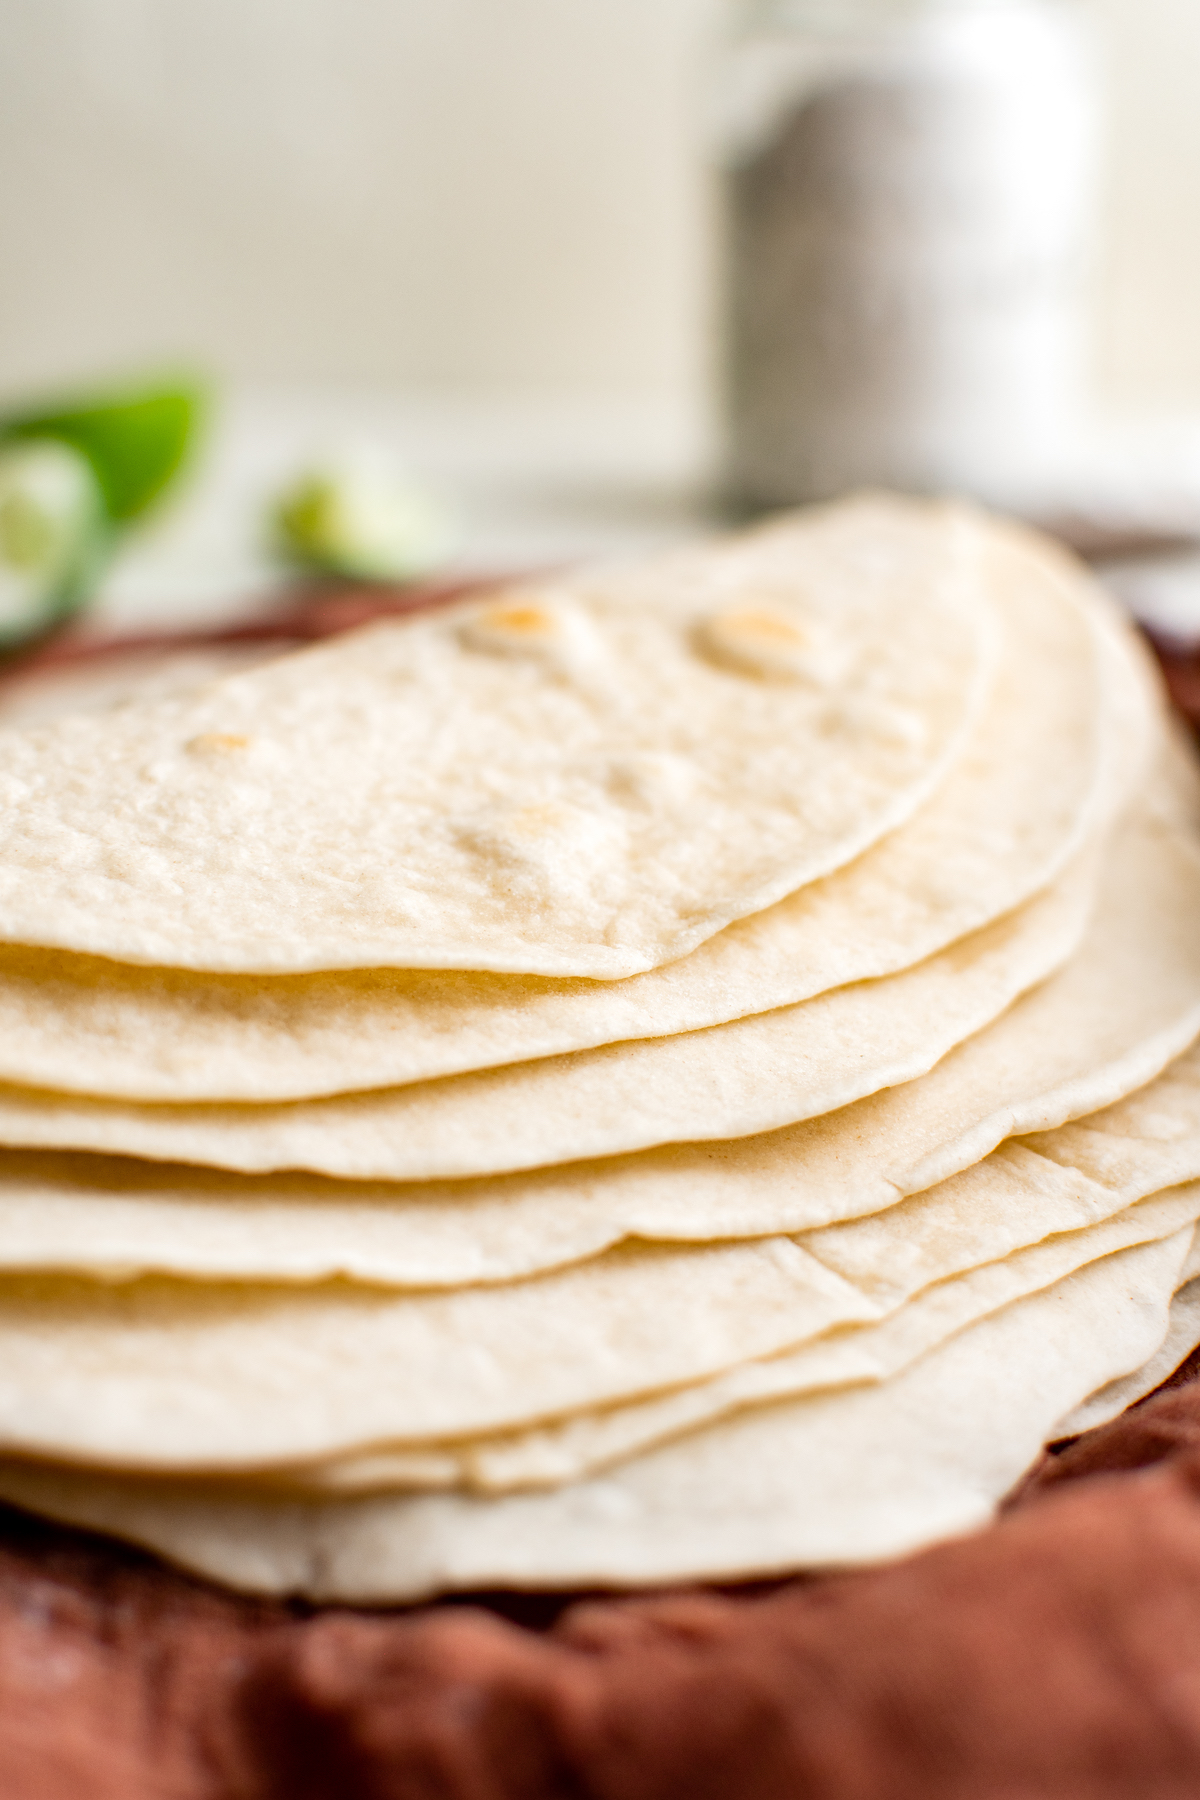 A close-up side view of tortillas fanned out on a napkin.